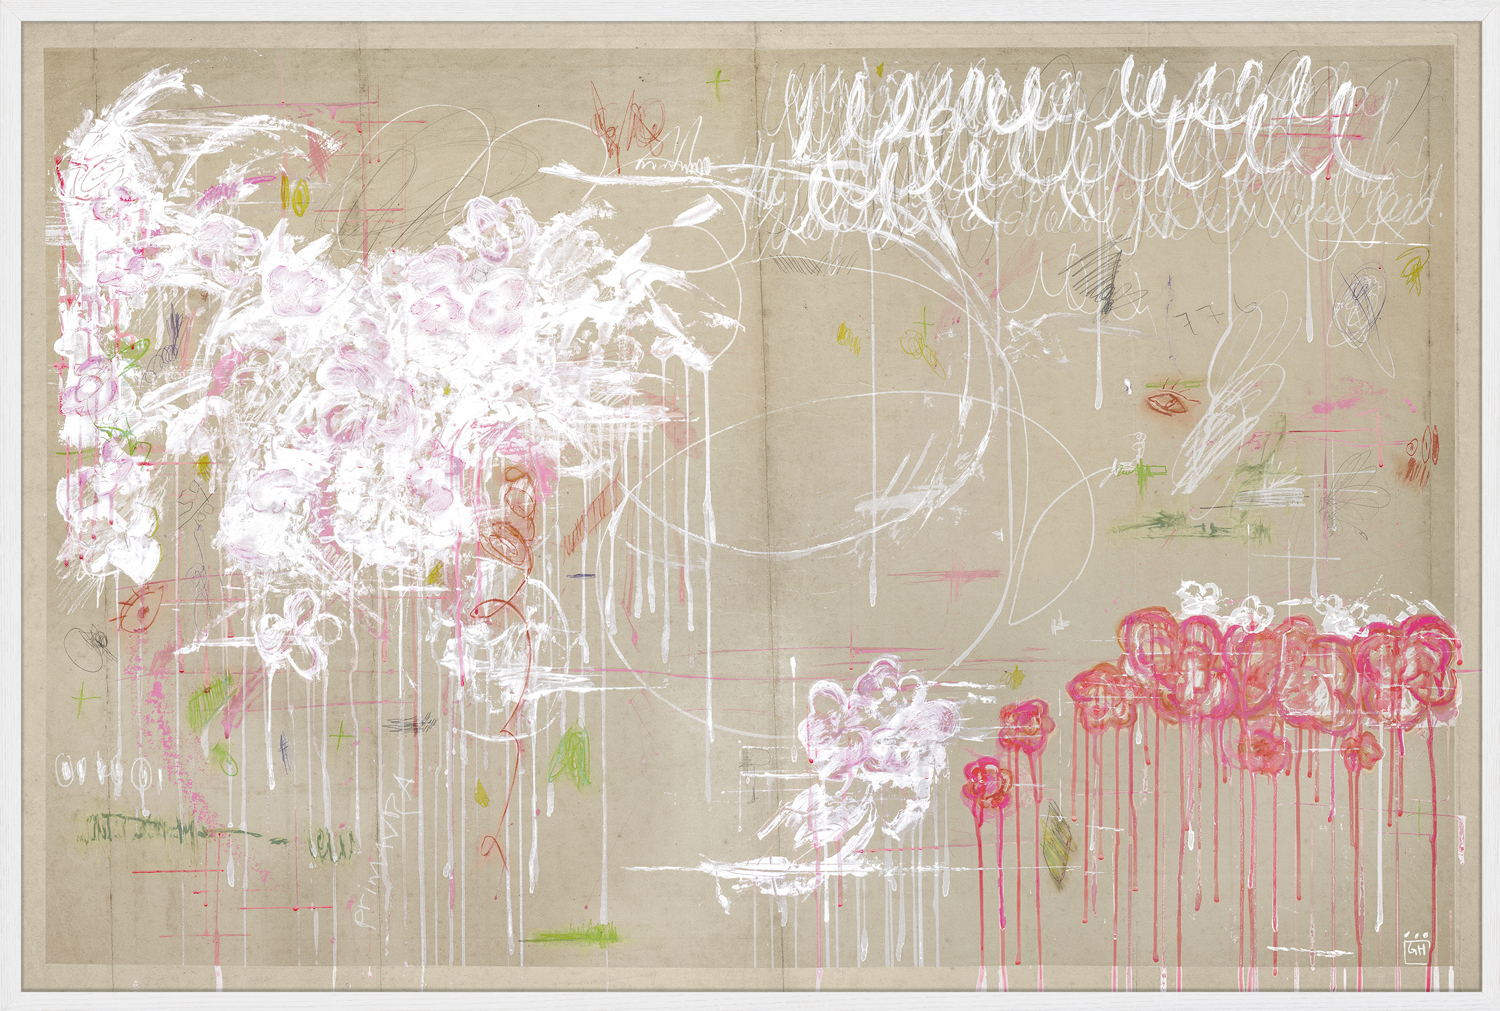 Framed abstract painting with dripping paint and expressive gestural marks done in white, pink, and green on a beige background.